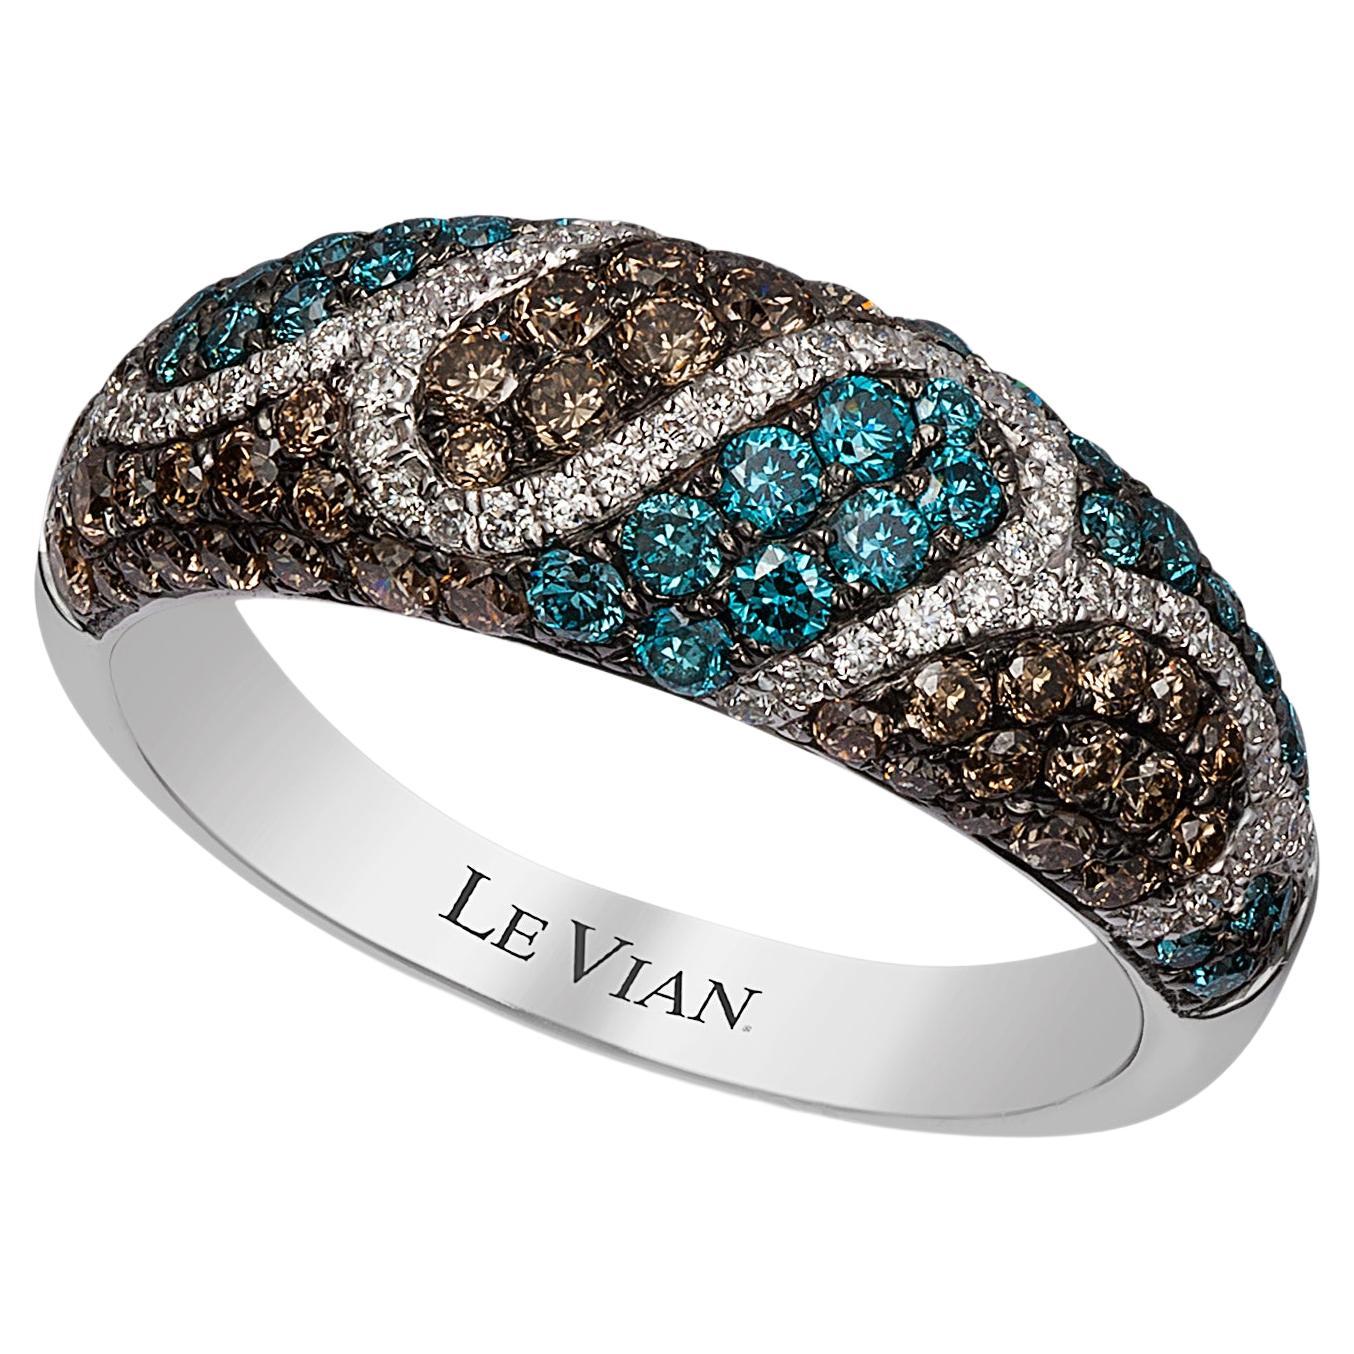 Levian Ring Blue Chocolate and White Diamonds Set in 14K White Gold